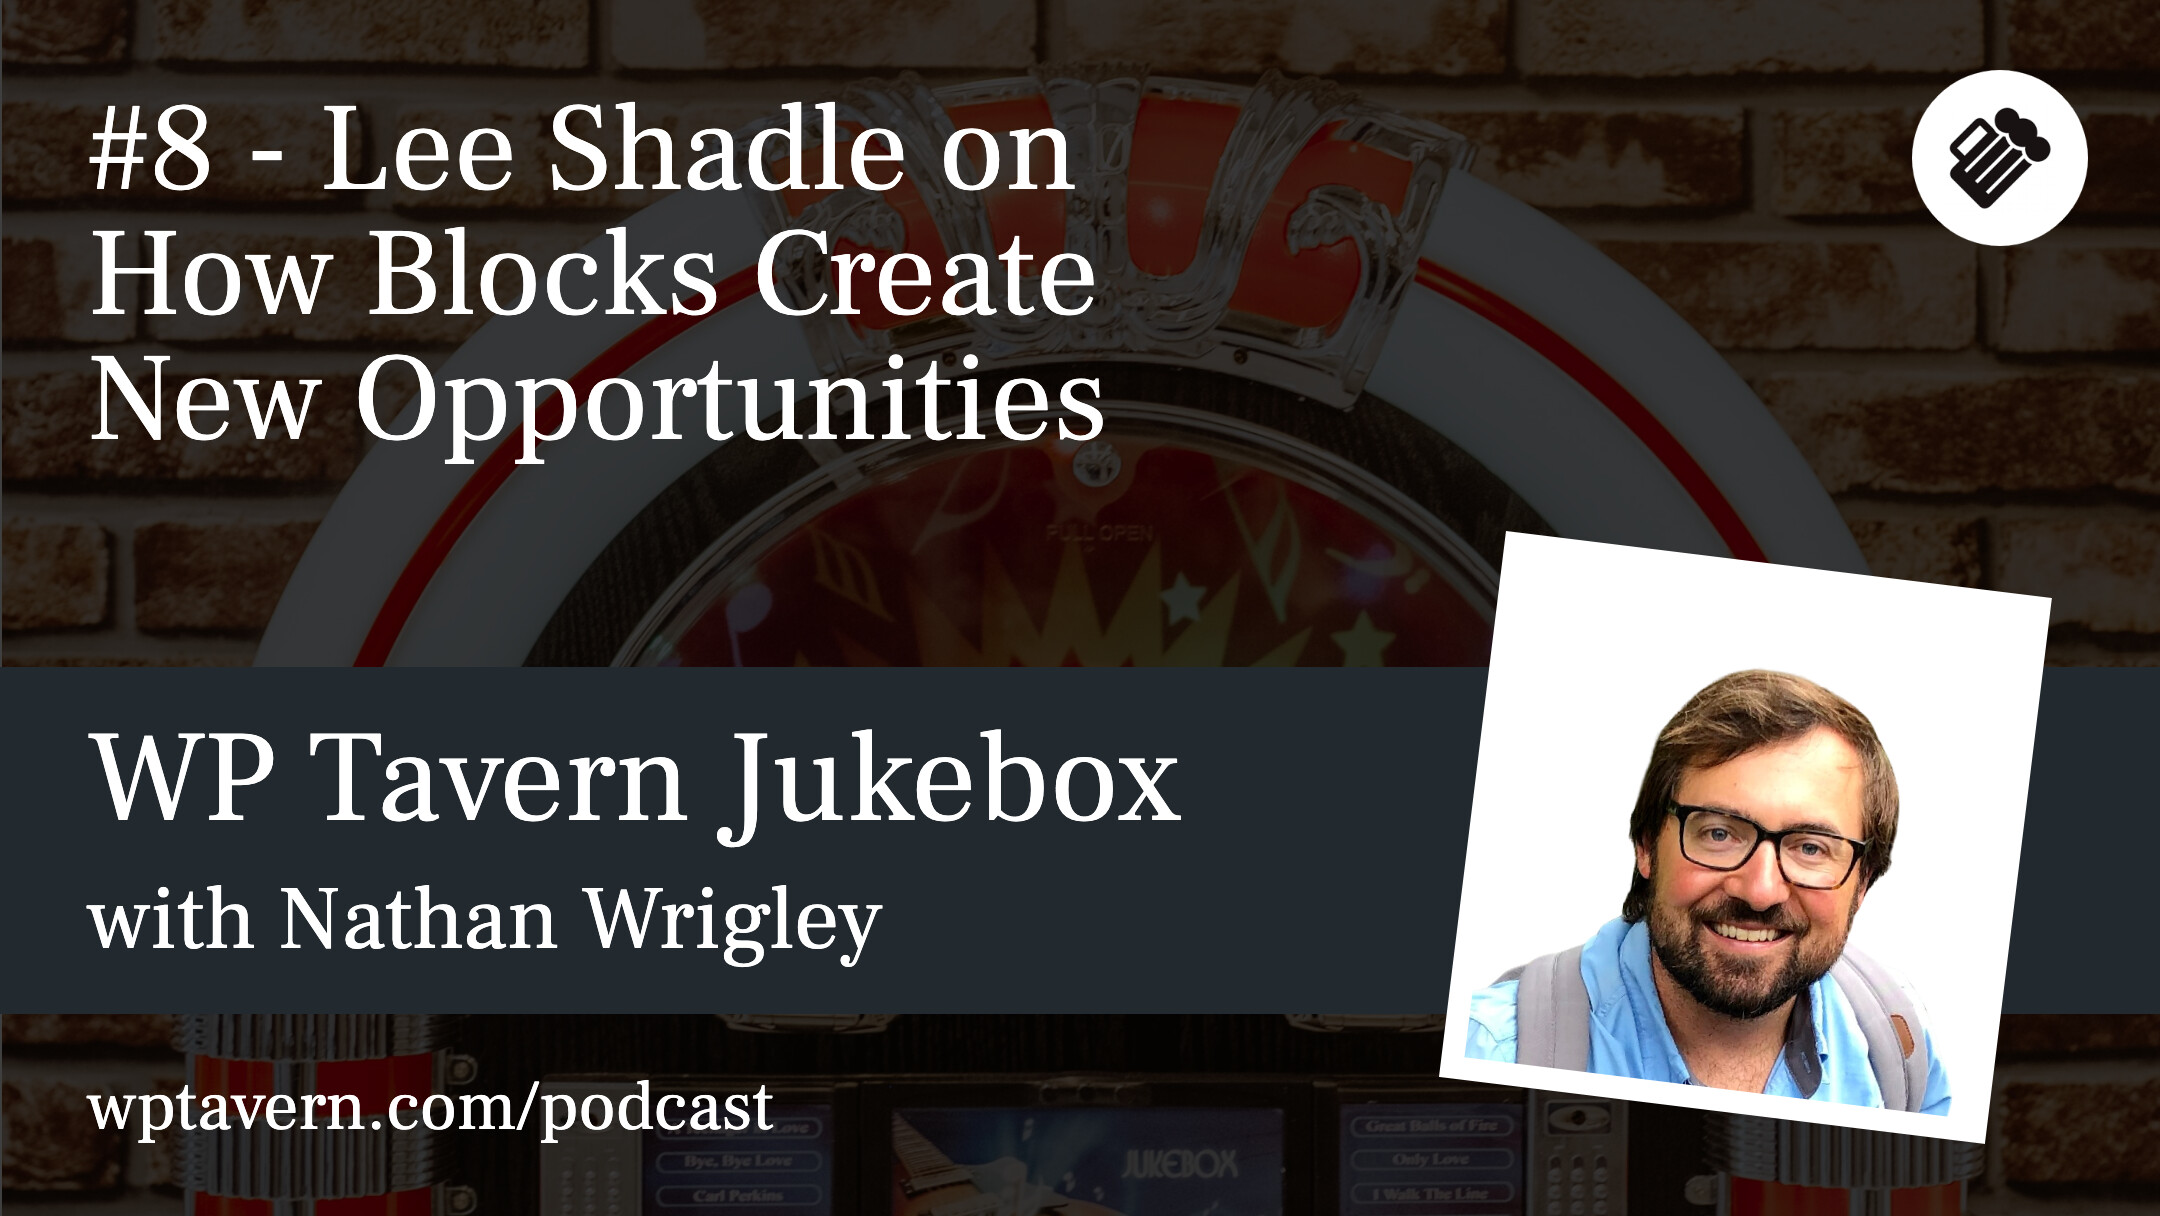 #8 - Lee Shadle on How Blocks Create New Opportunities